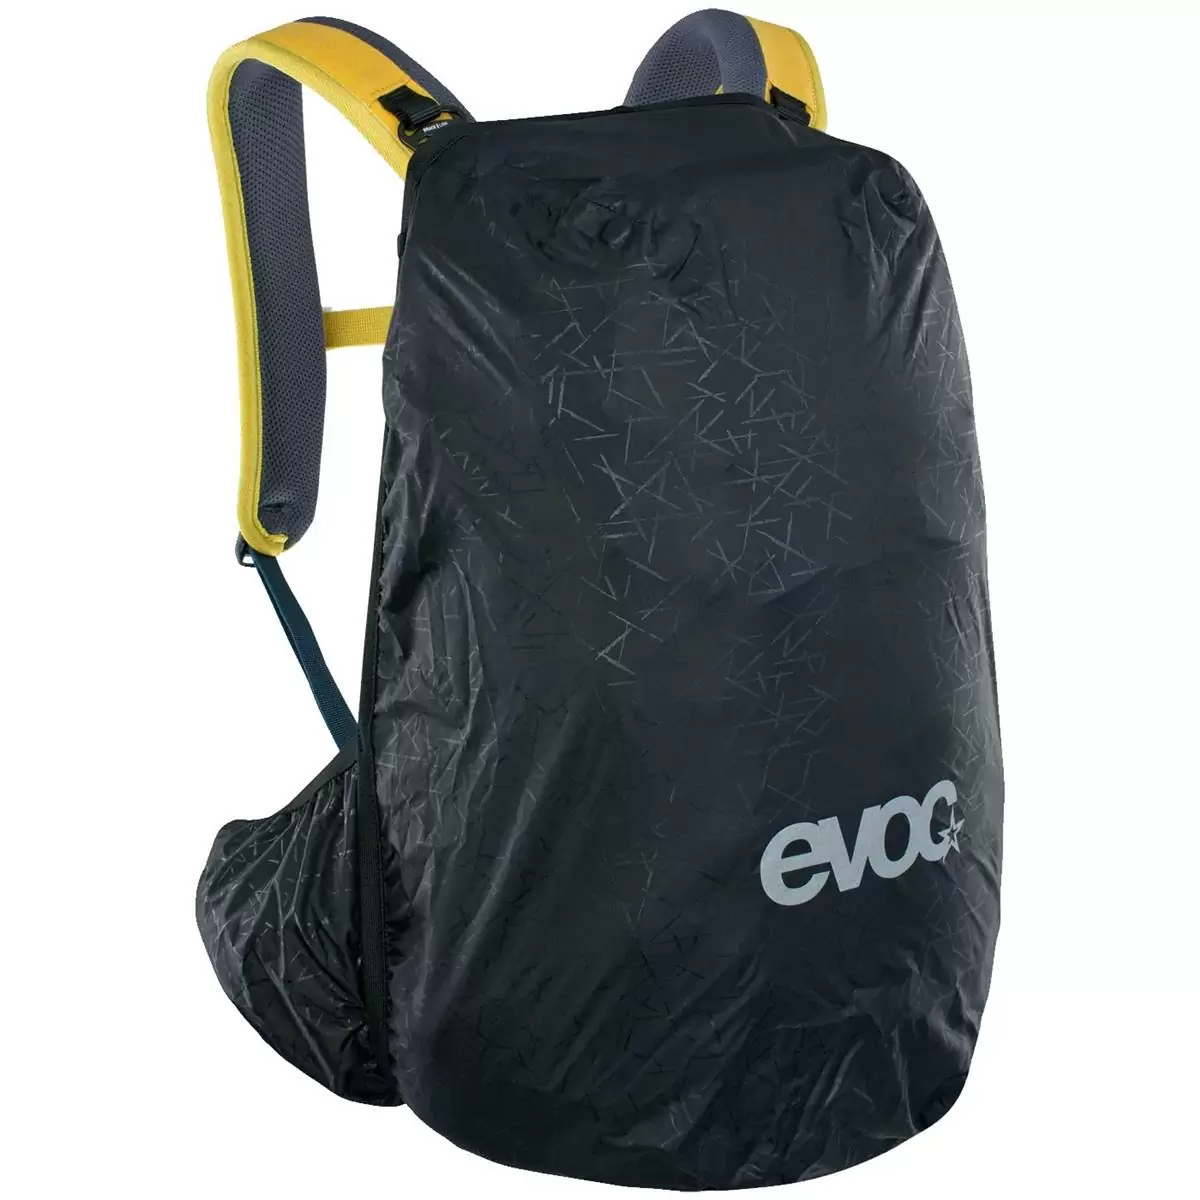 Trail Pro Backpack 26 liters Curry – Denim with Back Protector size S/M #3